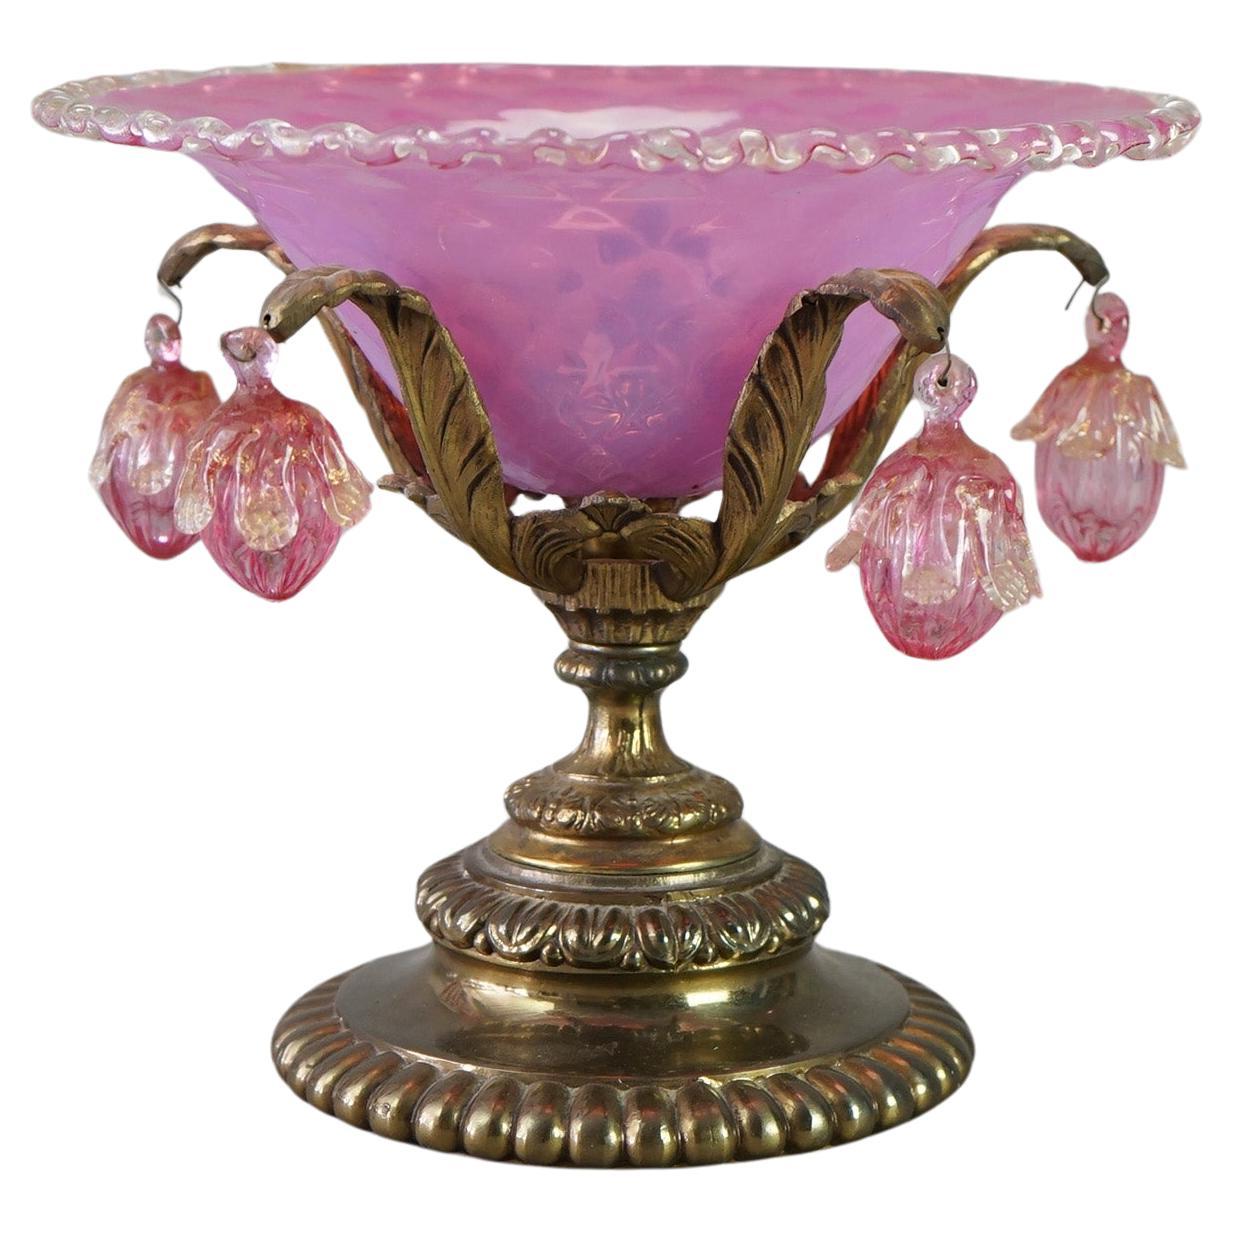 Antique Venetian Murano Pink Glass Compote with Blown Glass Ornaments C1890